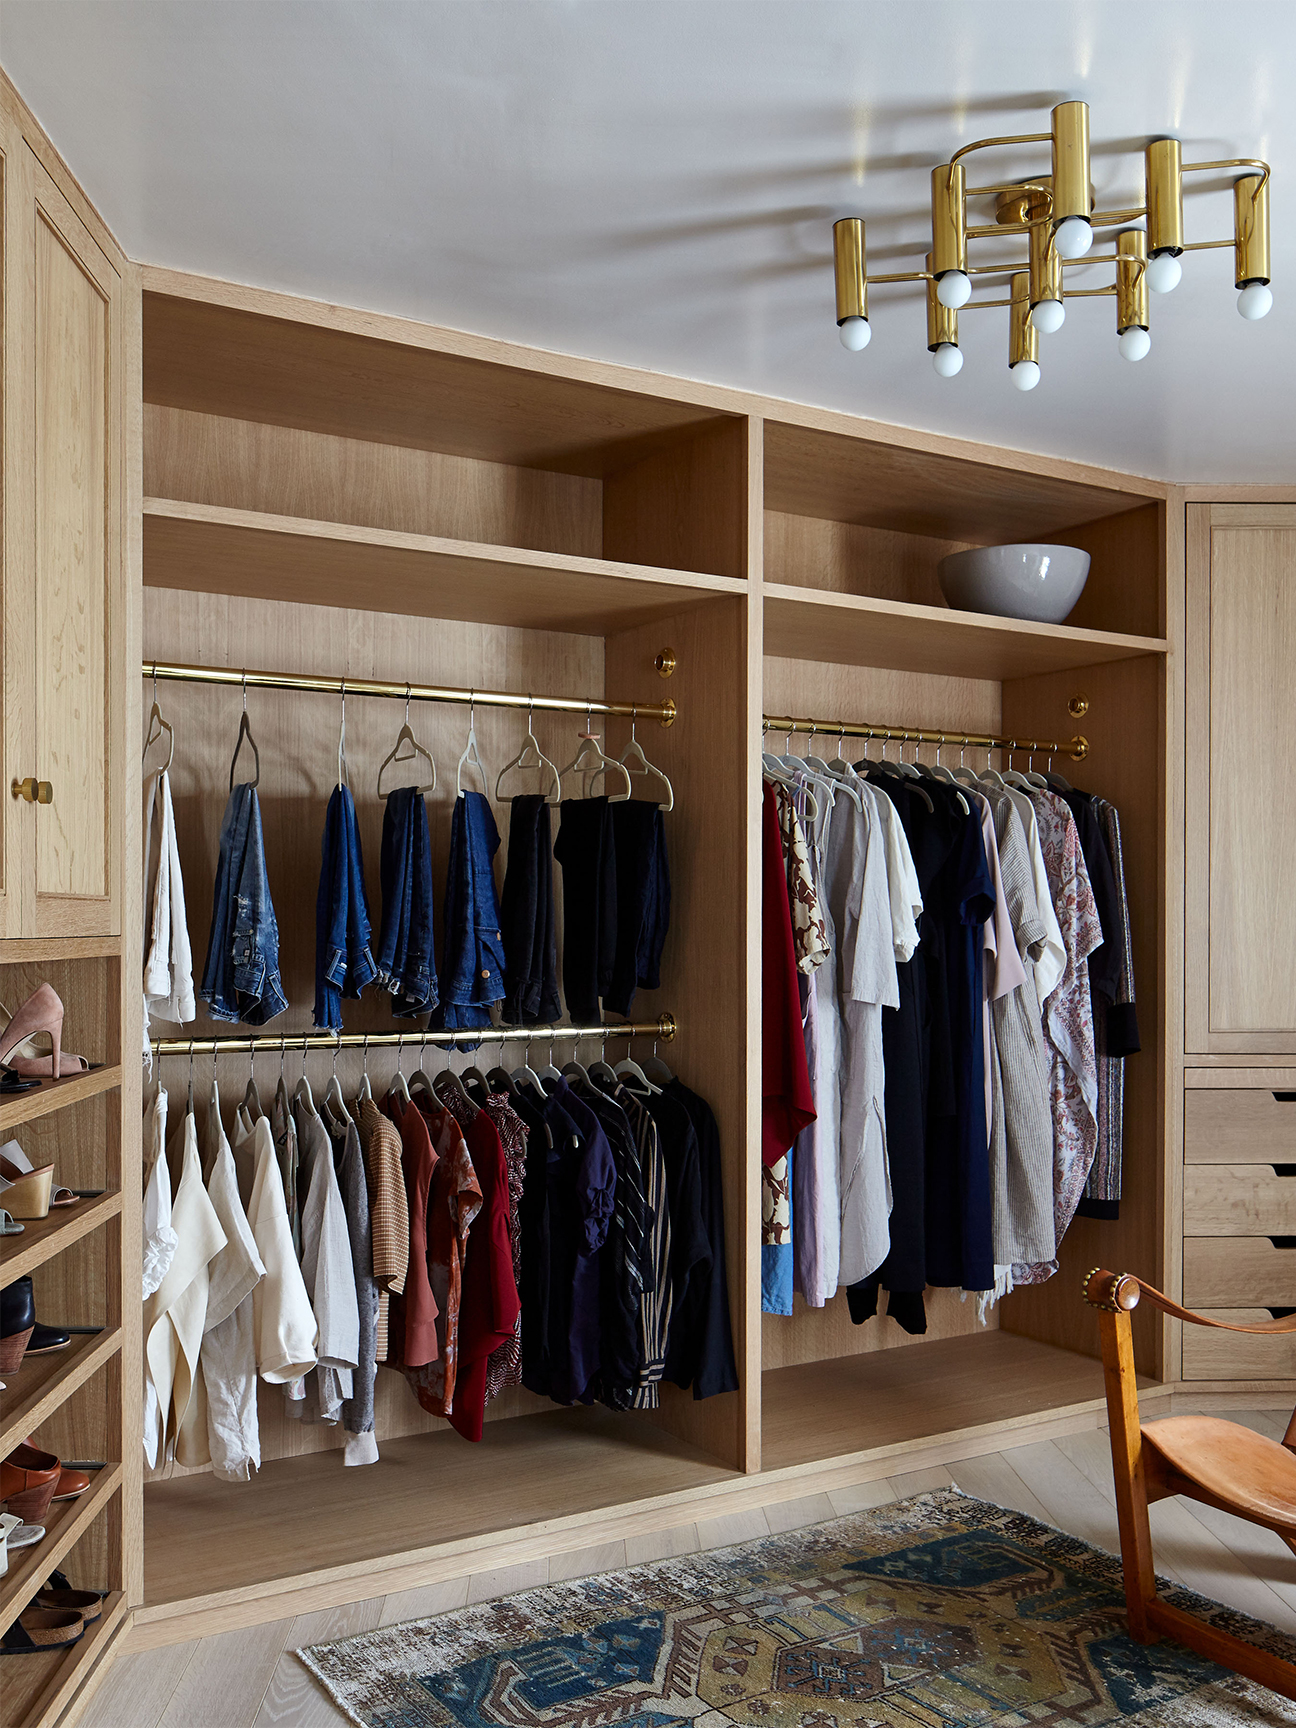 Walk-in closet with brass and oak finishes